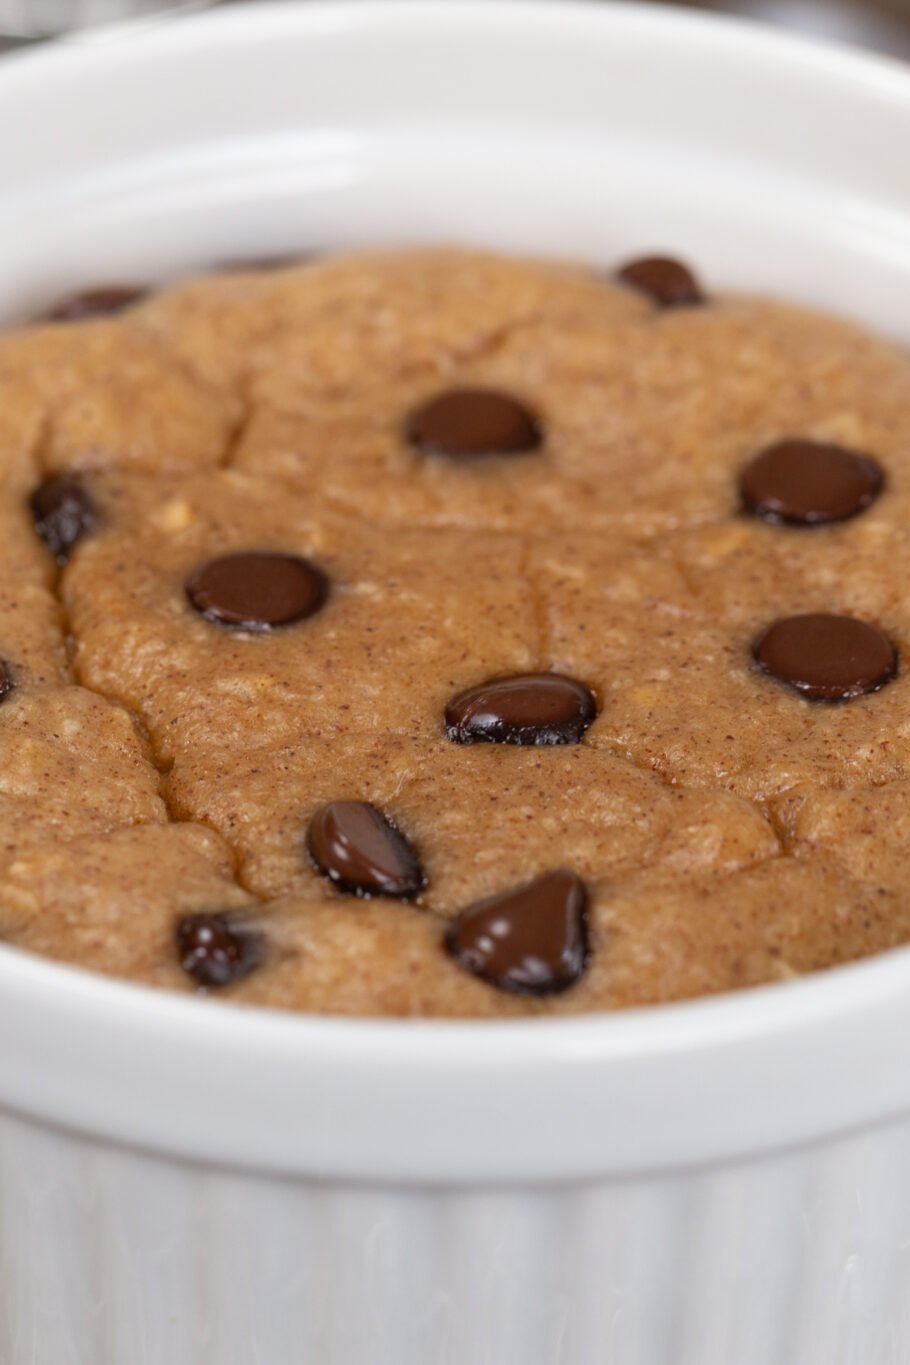 Easy High Protein Baked Oatmeal Recipe - The Protein Chef